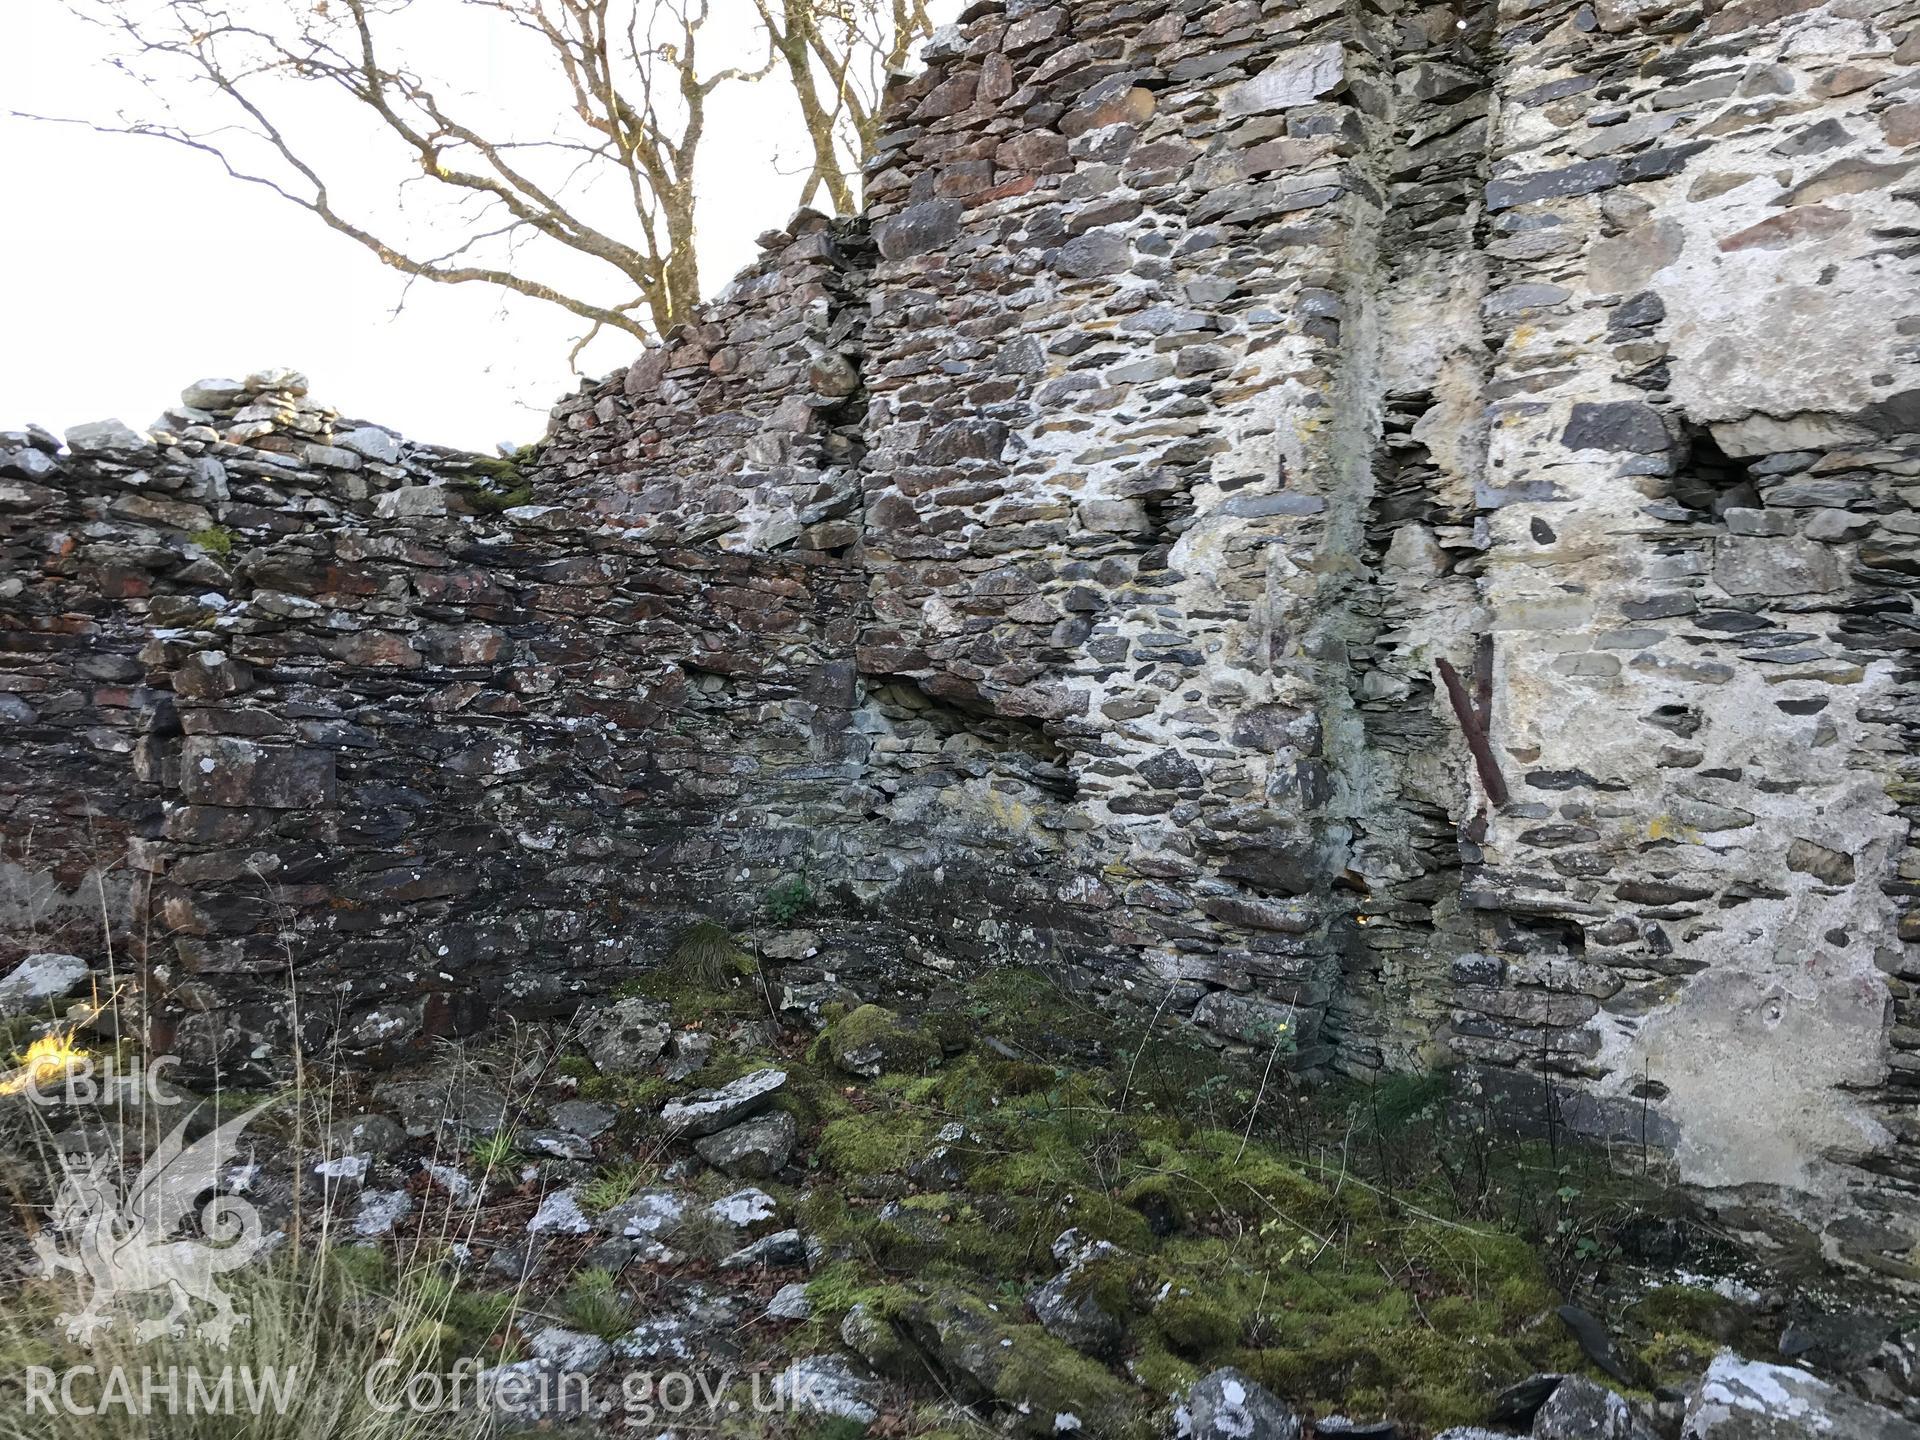 Detailed view showing interior of the ruined drystone walled Pen-Cwm house, south west of Bryneithinog farm, Ystrad Fflur. Colour photograph taken by Paul R. Davis on 18th November 2018.